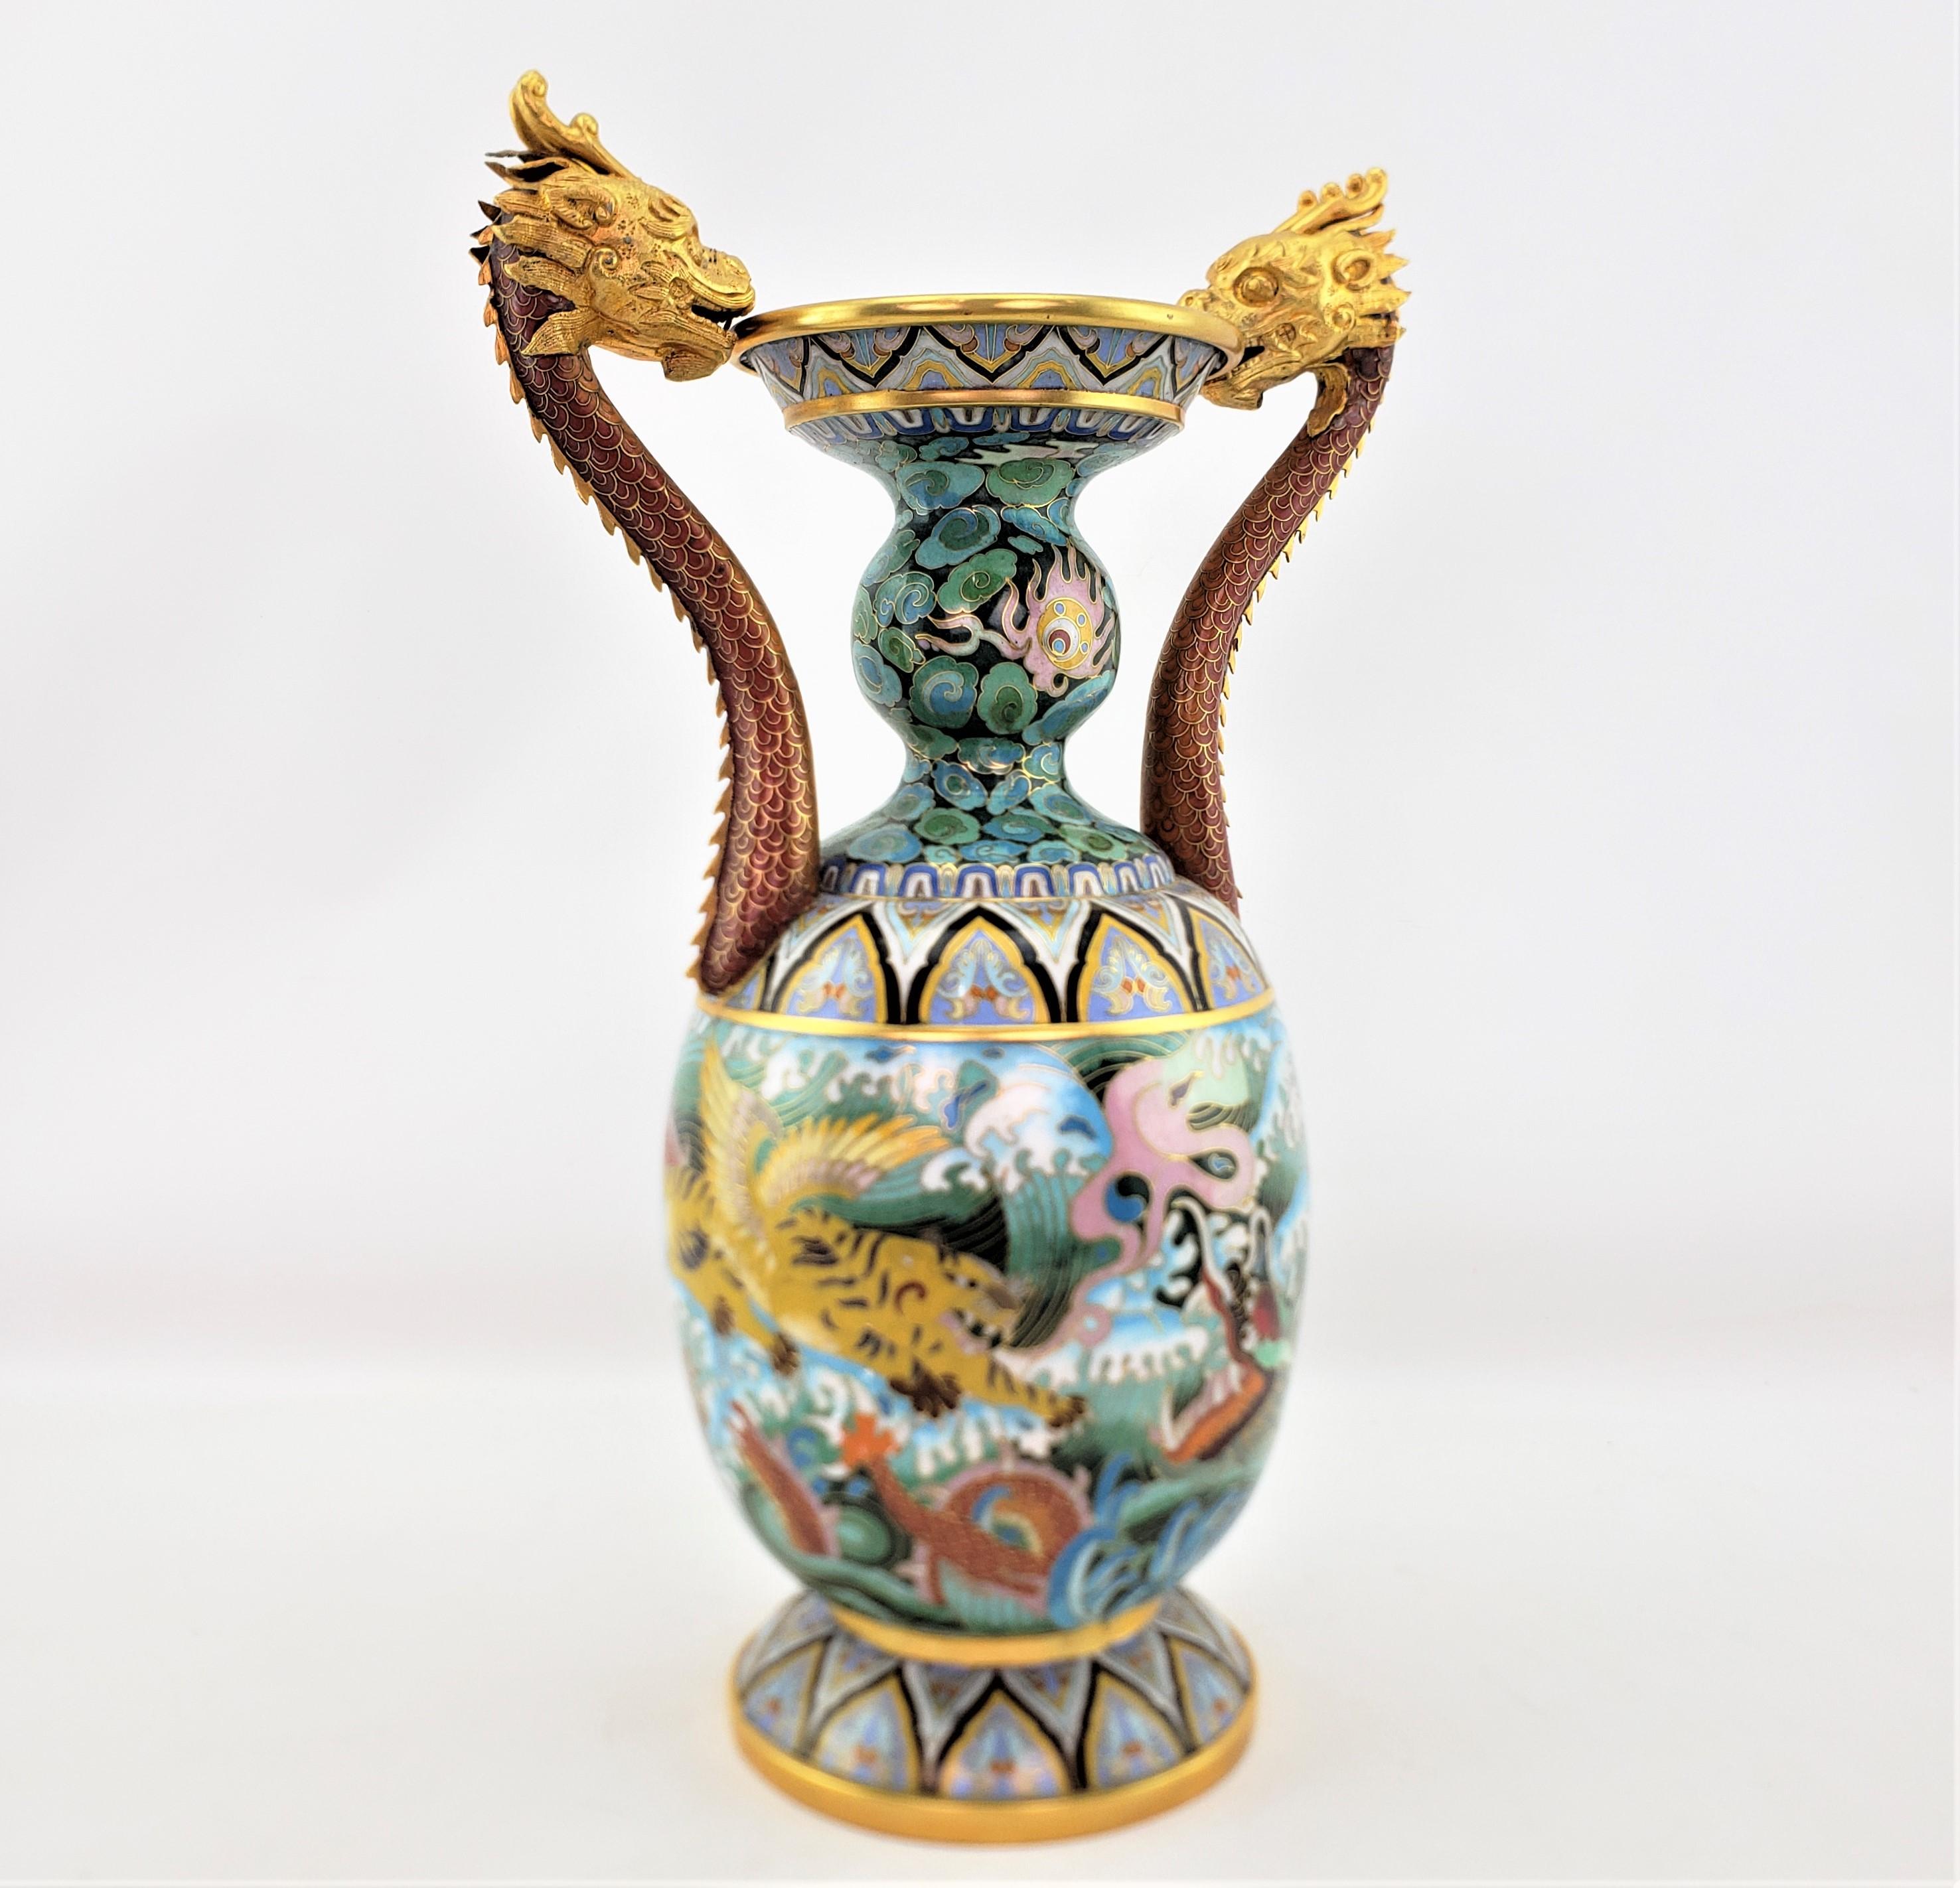 This large vintage cloissone vase is signed by an unknown maker, and originated from China dating to approximately 1980 and done in a Chinese Export style. The vase is composed of brass with ornately cast and gilt finished Imperial Dragon handles.